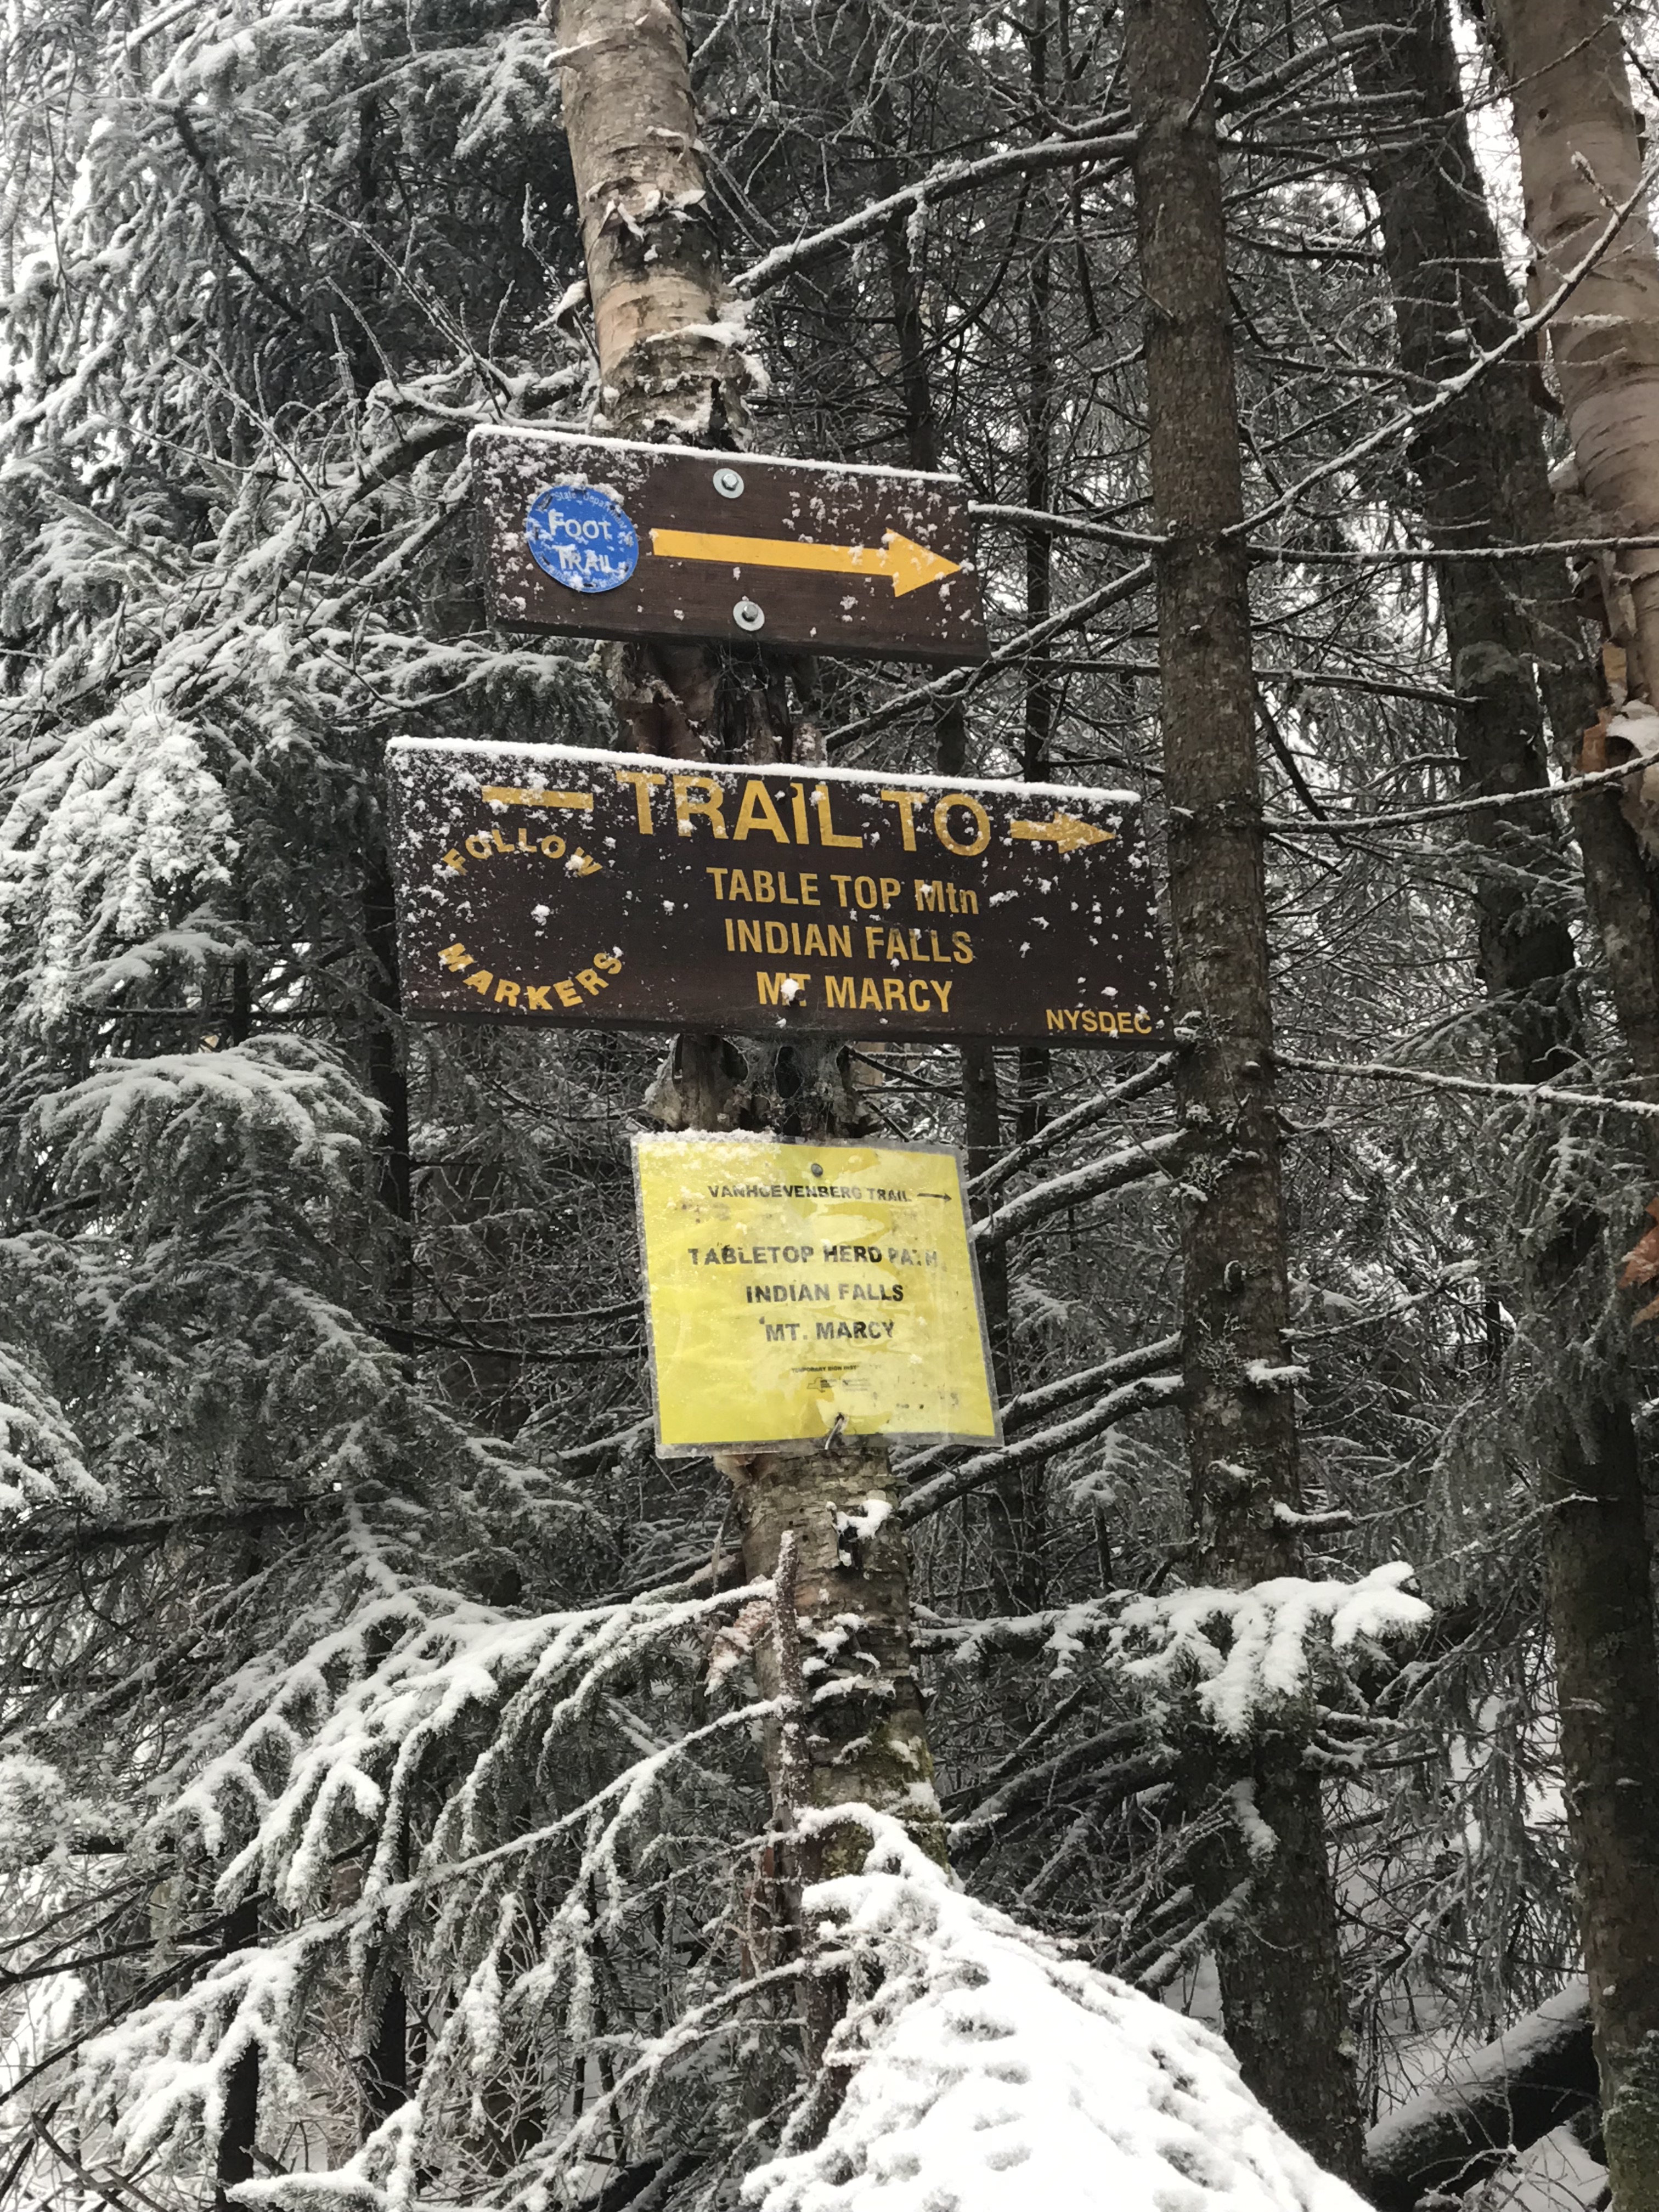 Trail sign to Tabletop 1